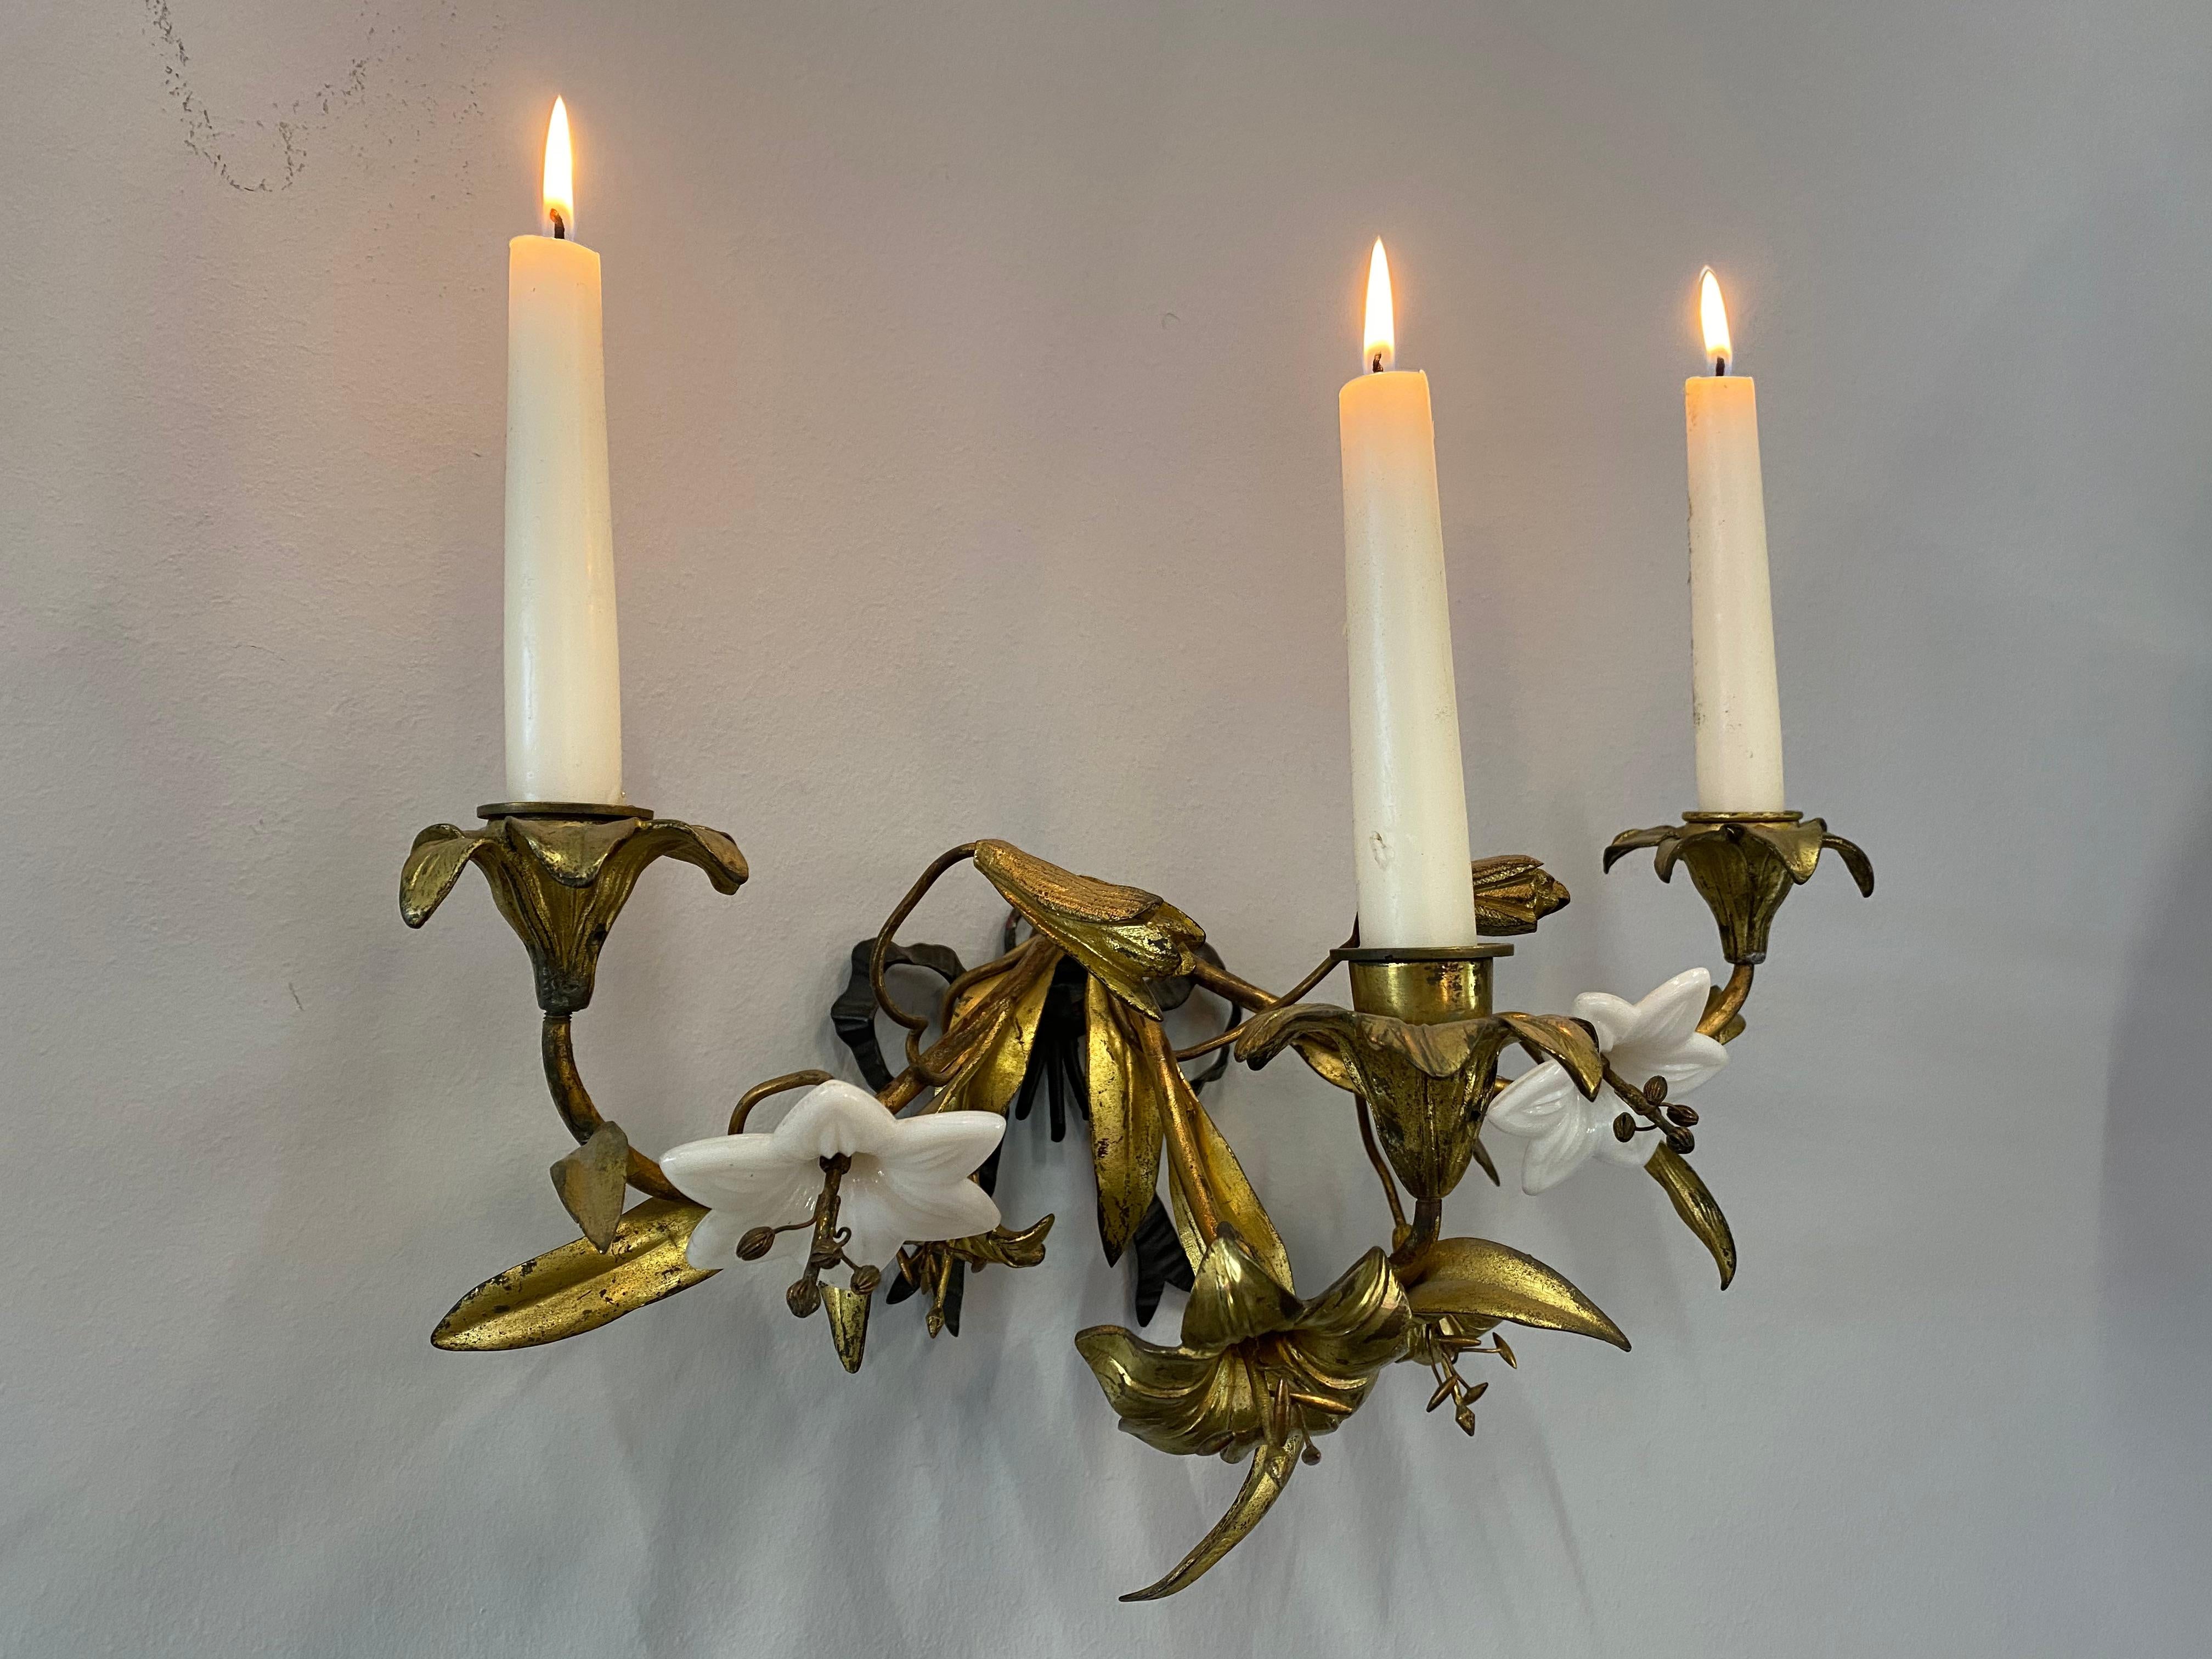 Metal French Art Nouveau Candleholder, 1900, Gilded, Floral , with Glass Blossoms